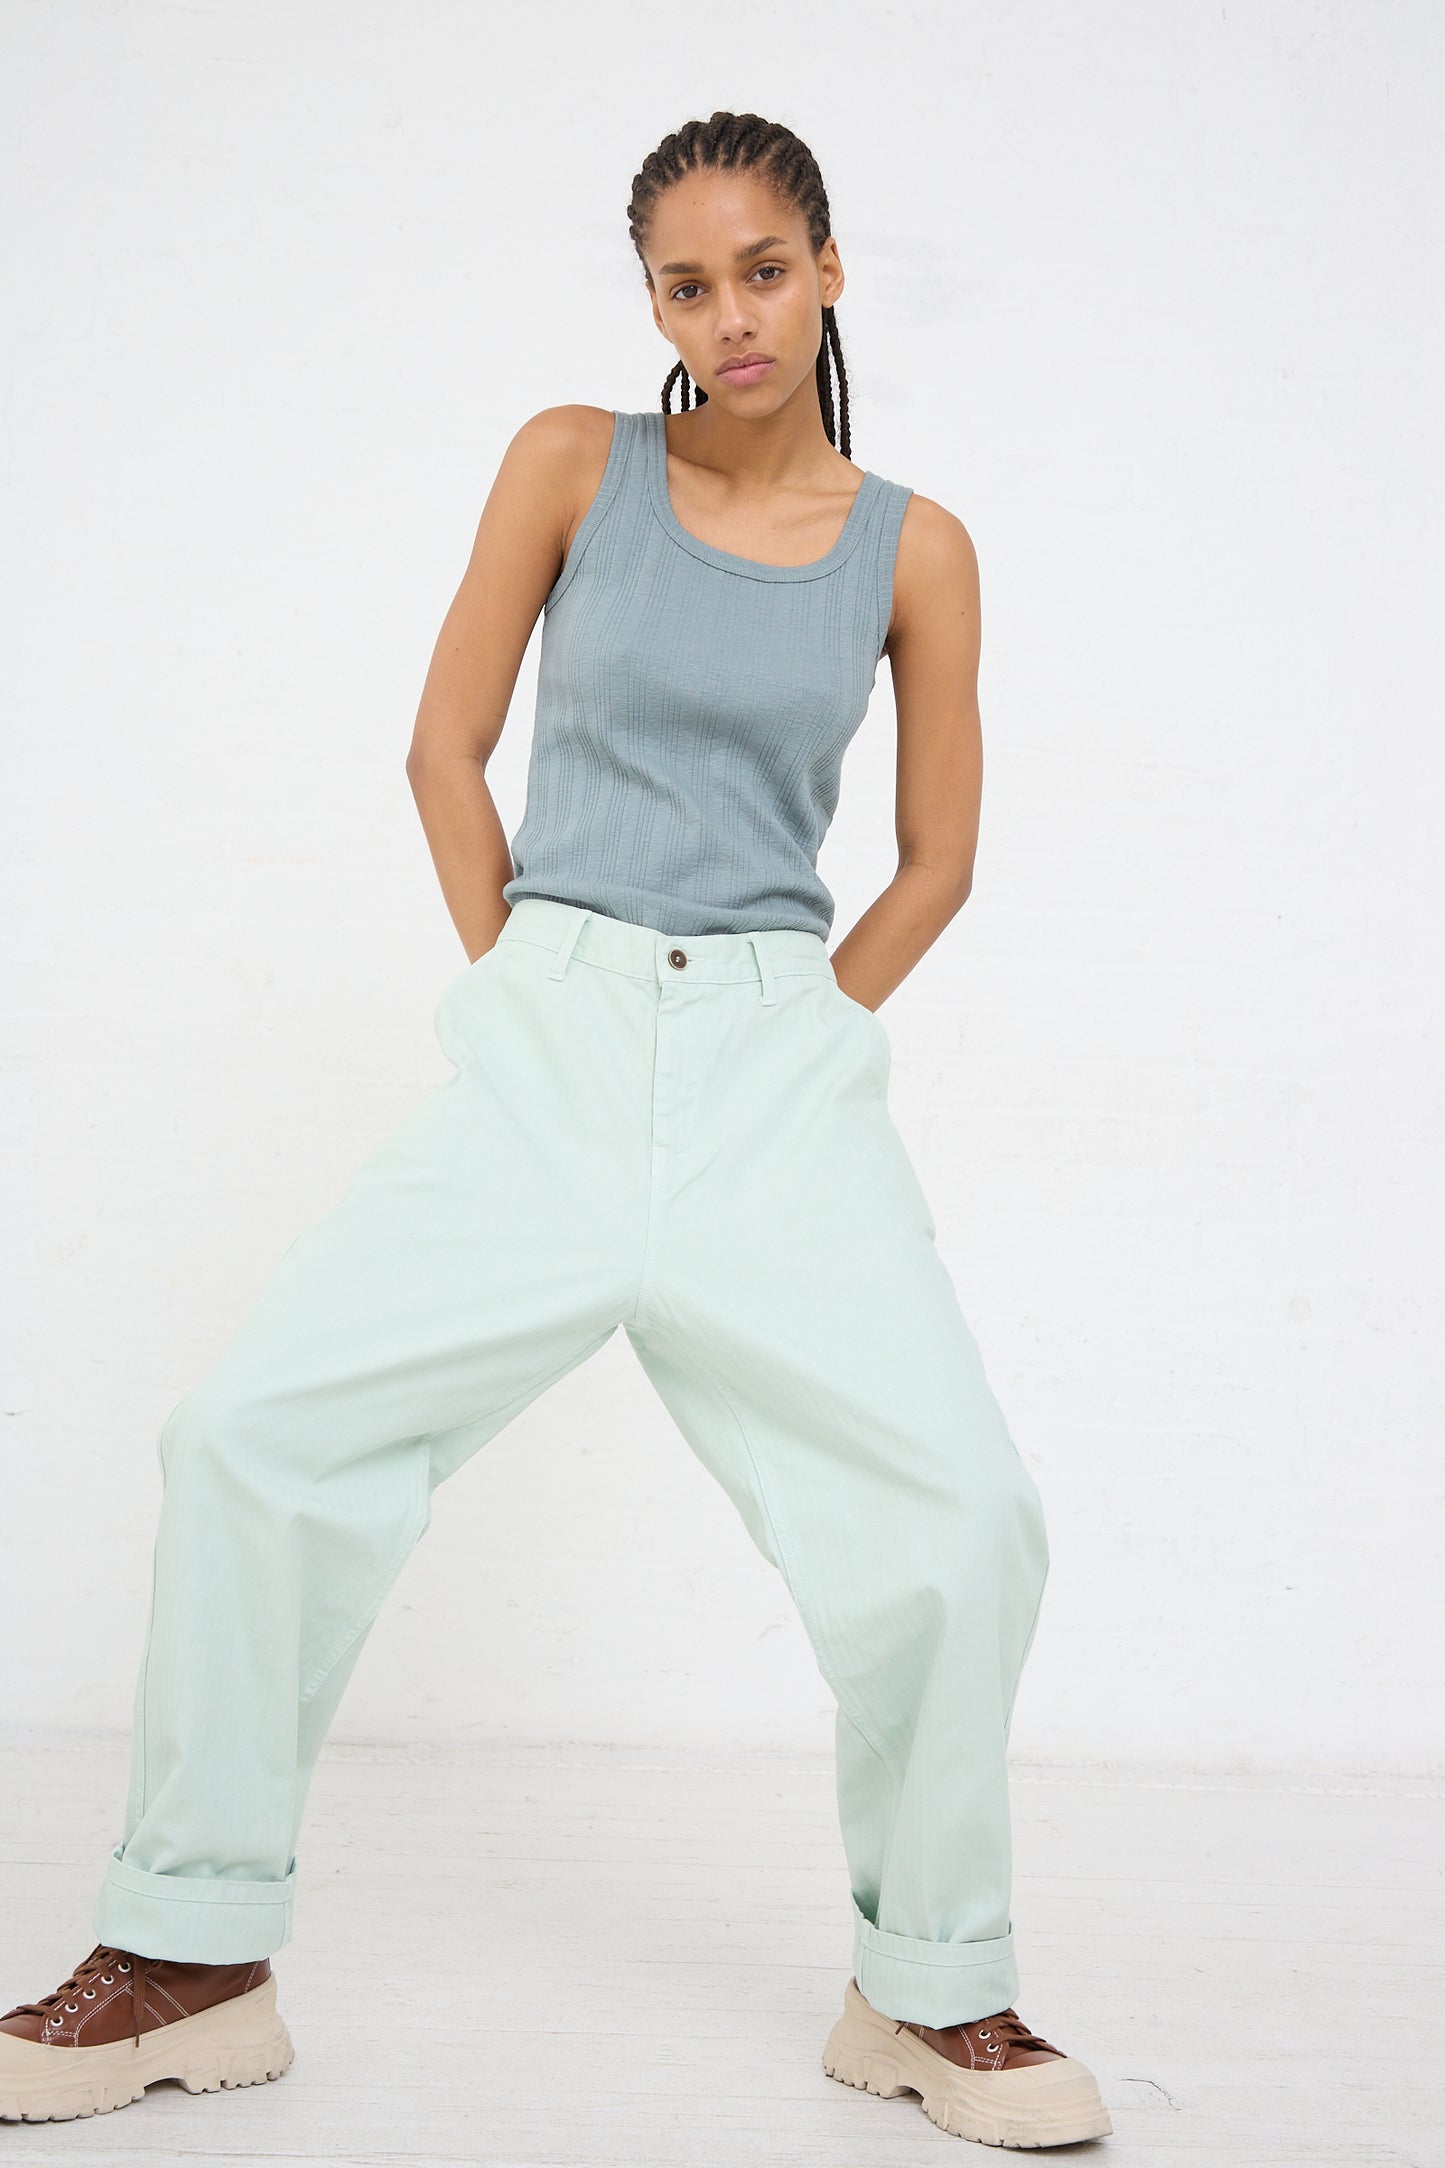 Woman posing in the Ichi Antiquités Herringbone Garment Dye Pant in Ice Green and a gray tank top against a white background.